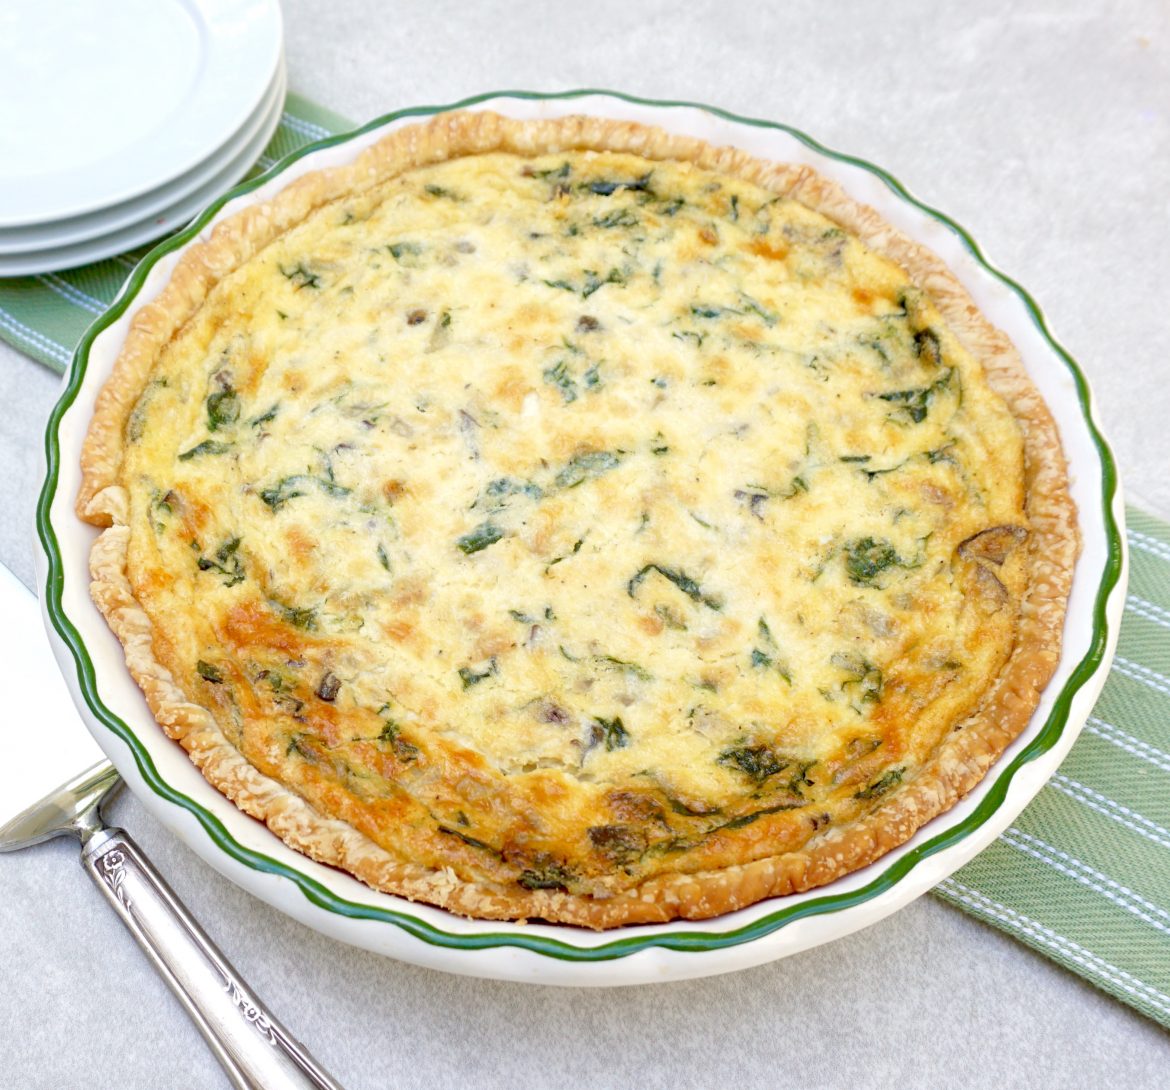 Spinach Mushroom Quiche is the perfect brunch dish